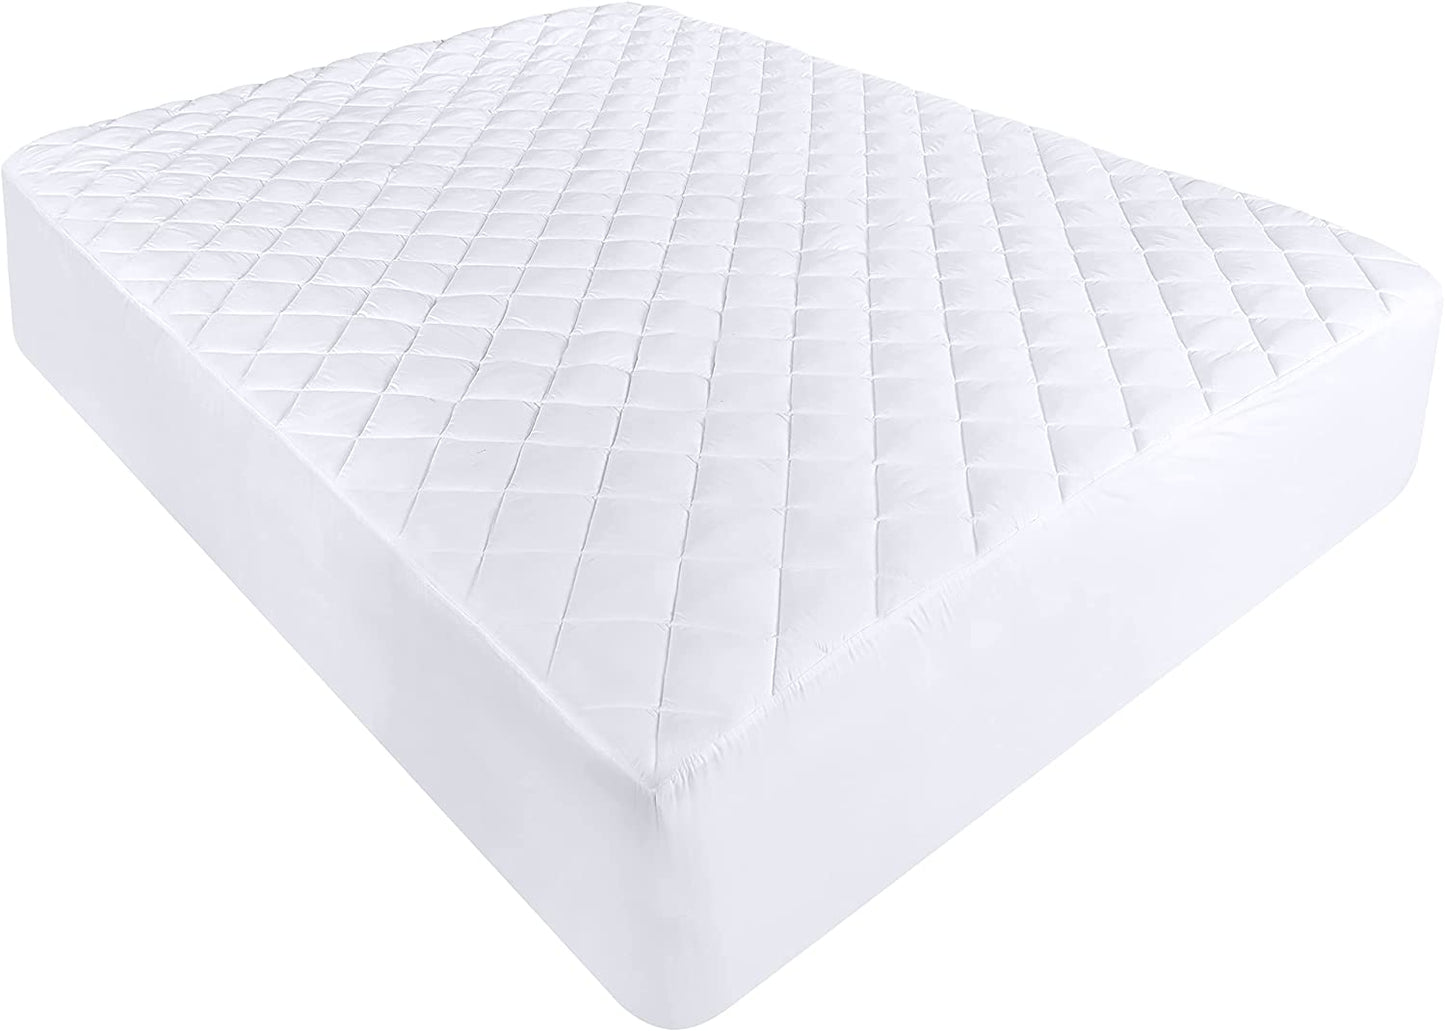 King Size Luxury Quilted Mattress Protector